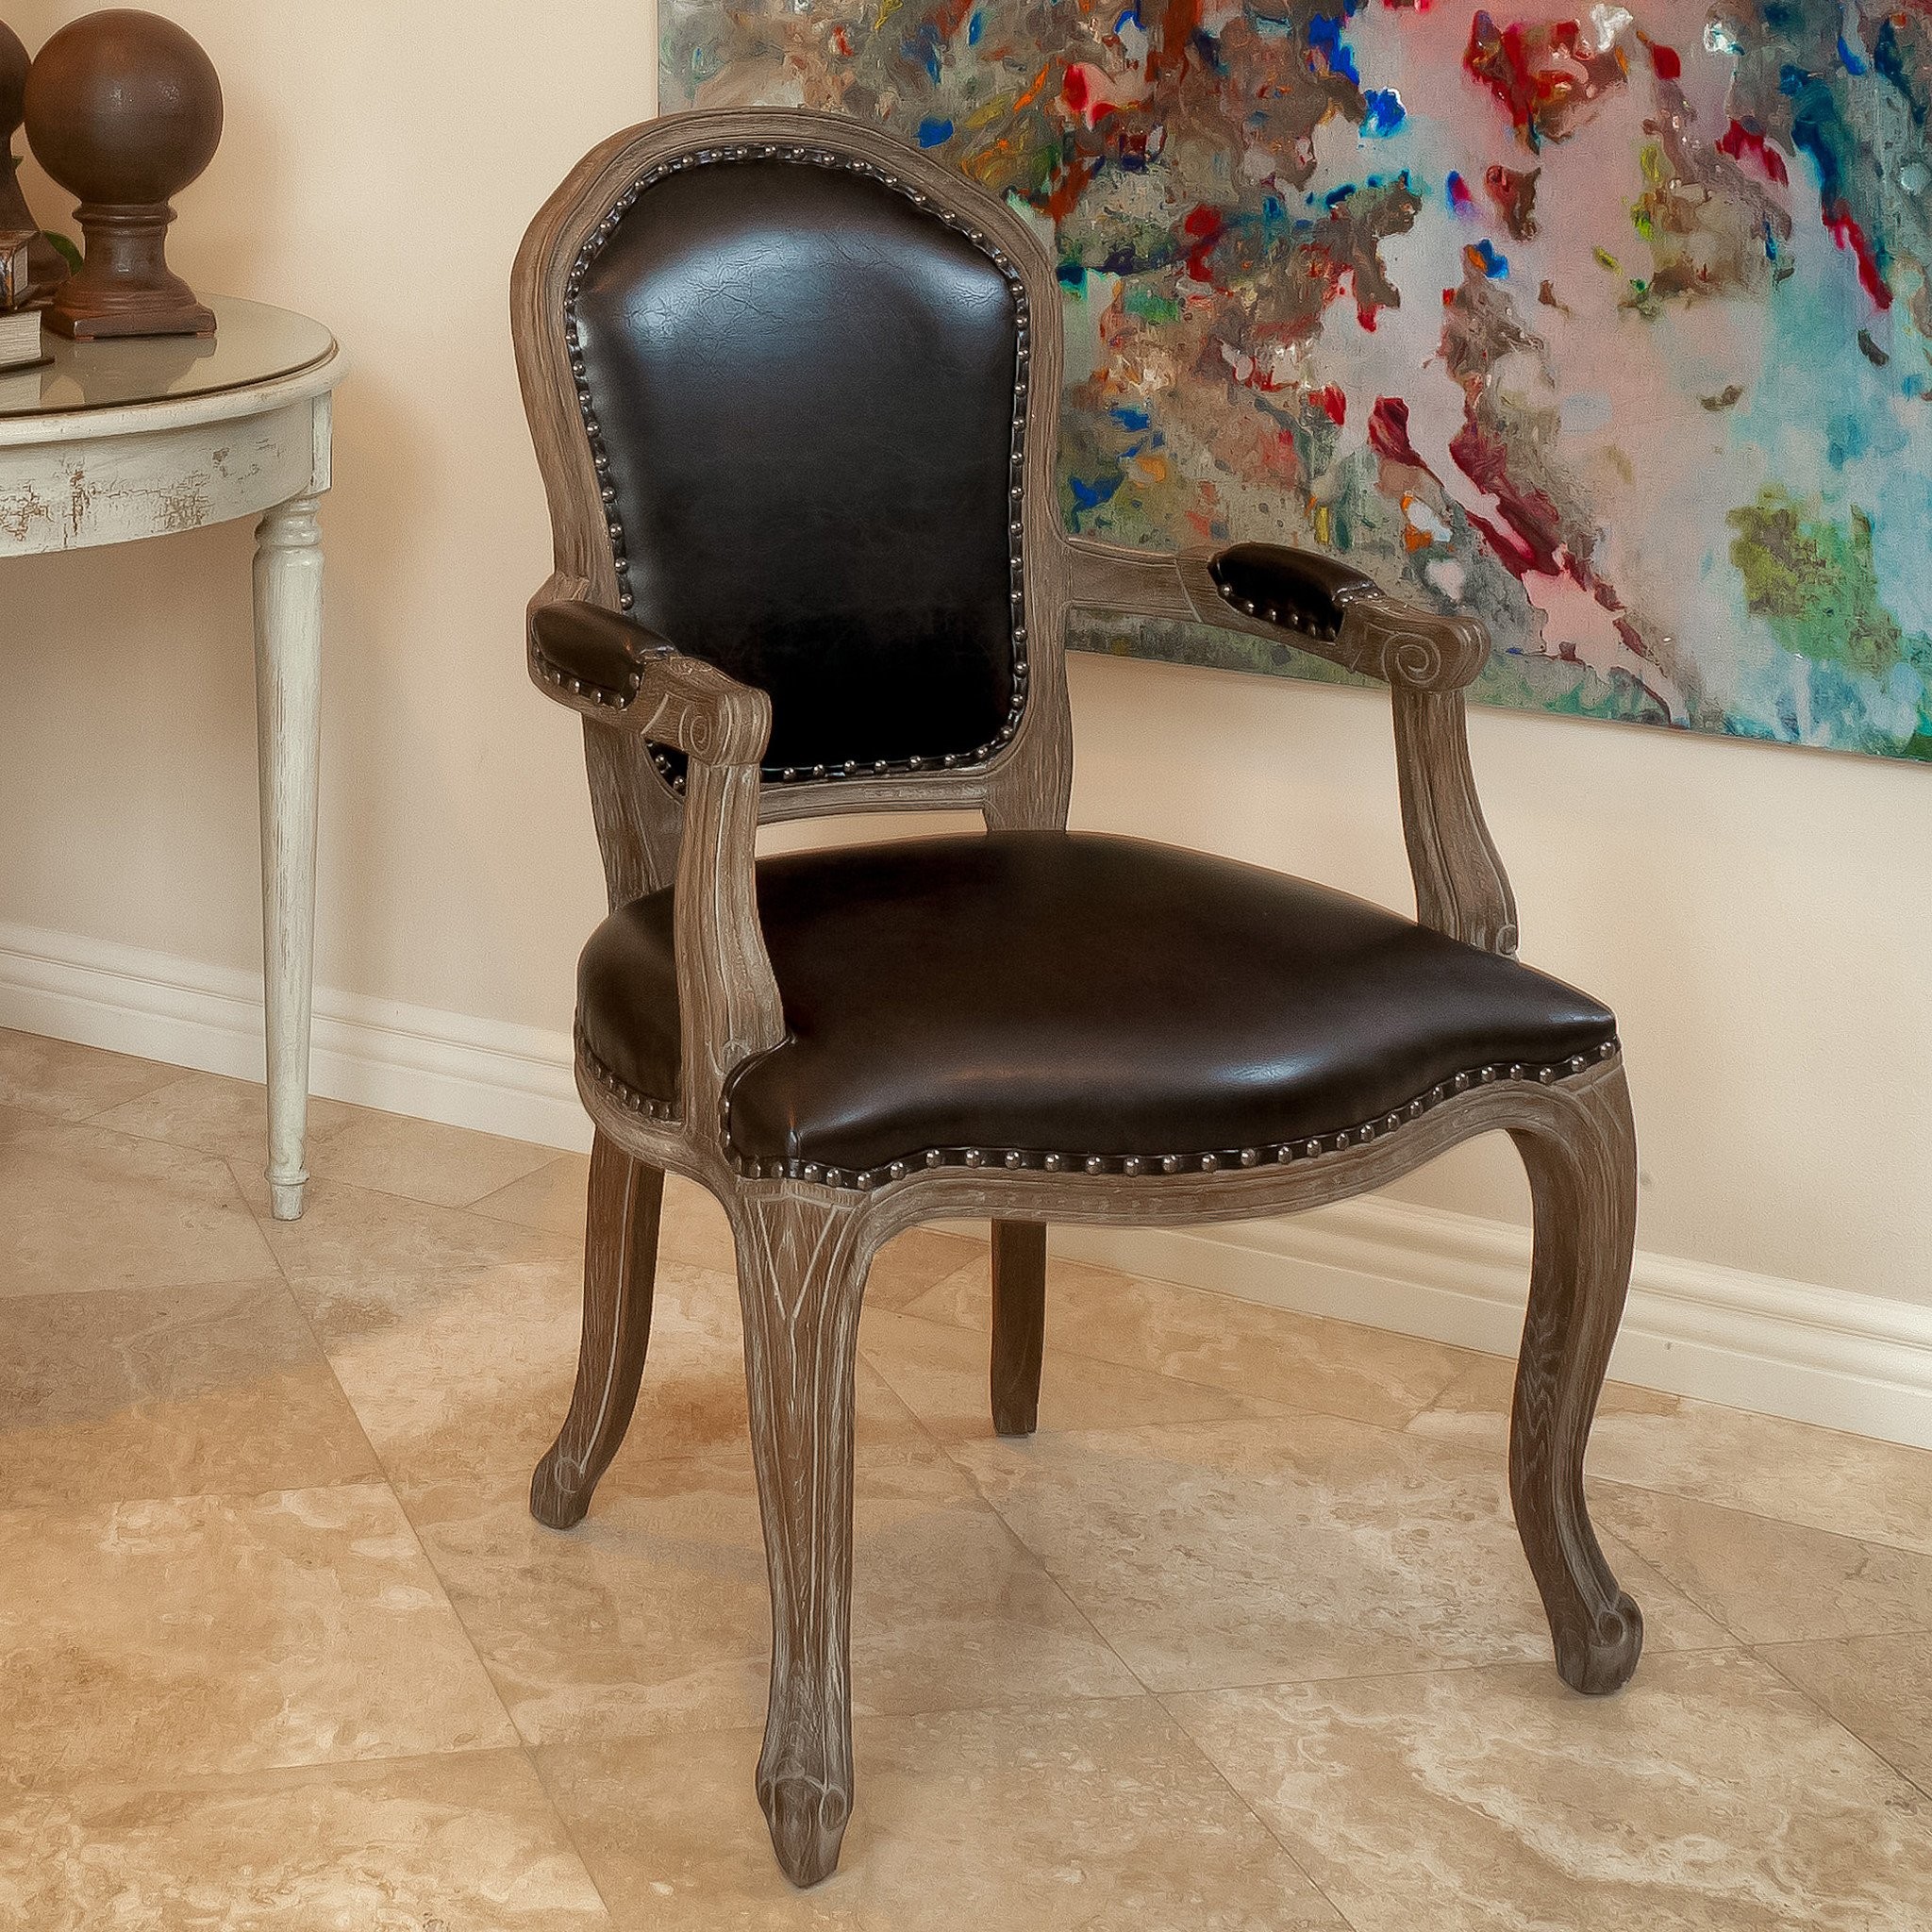 Queen Ann Leather Weathered Wood Dining Chairs